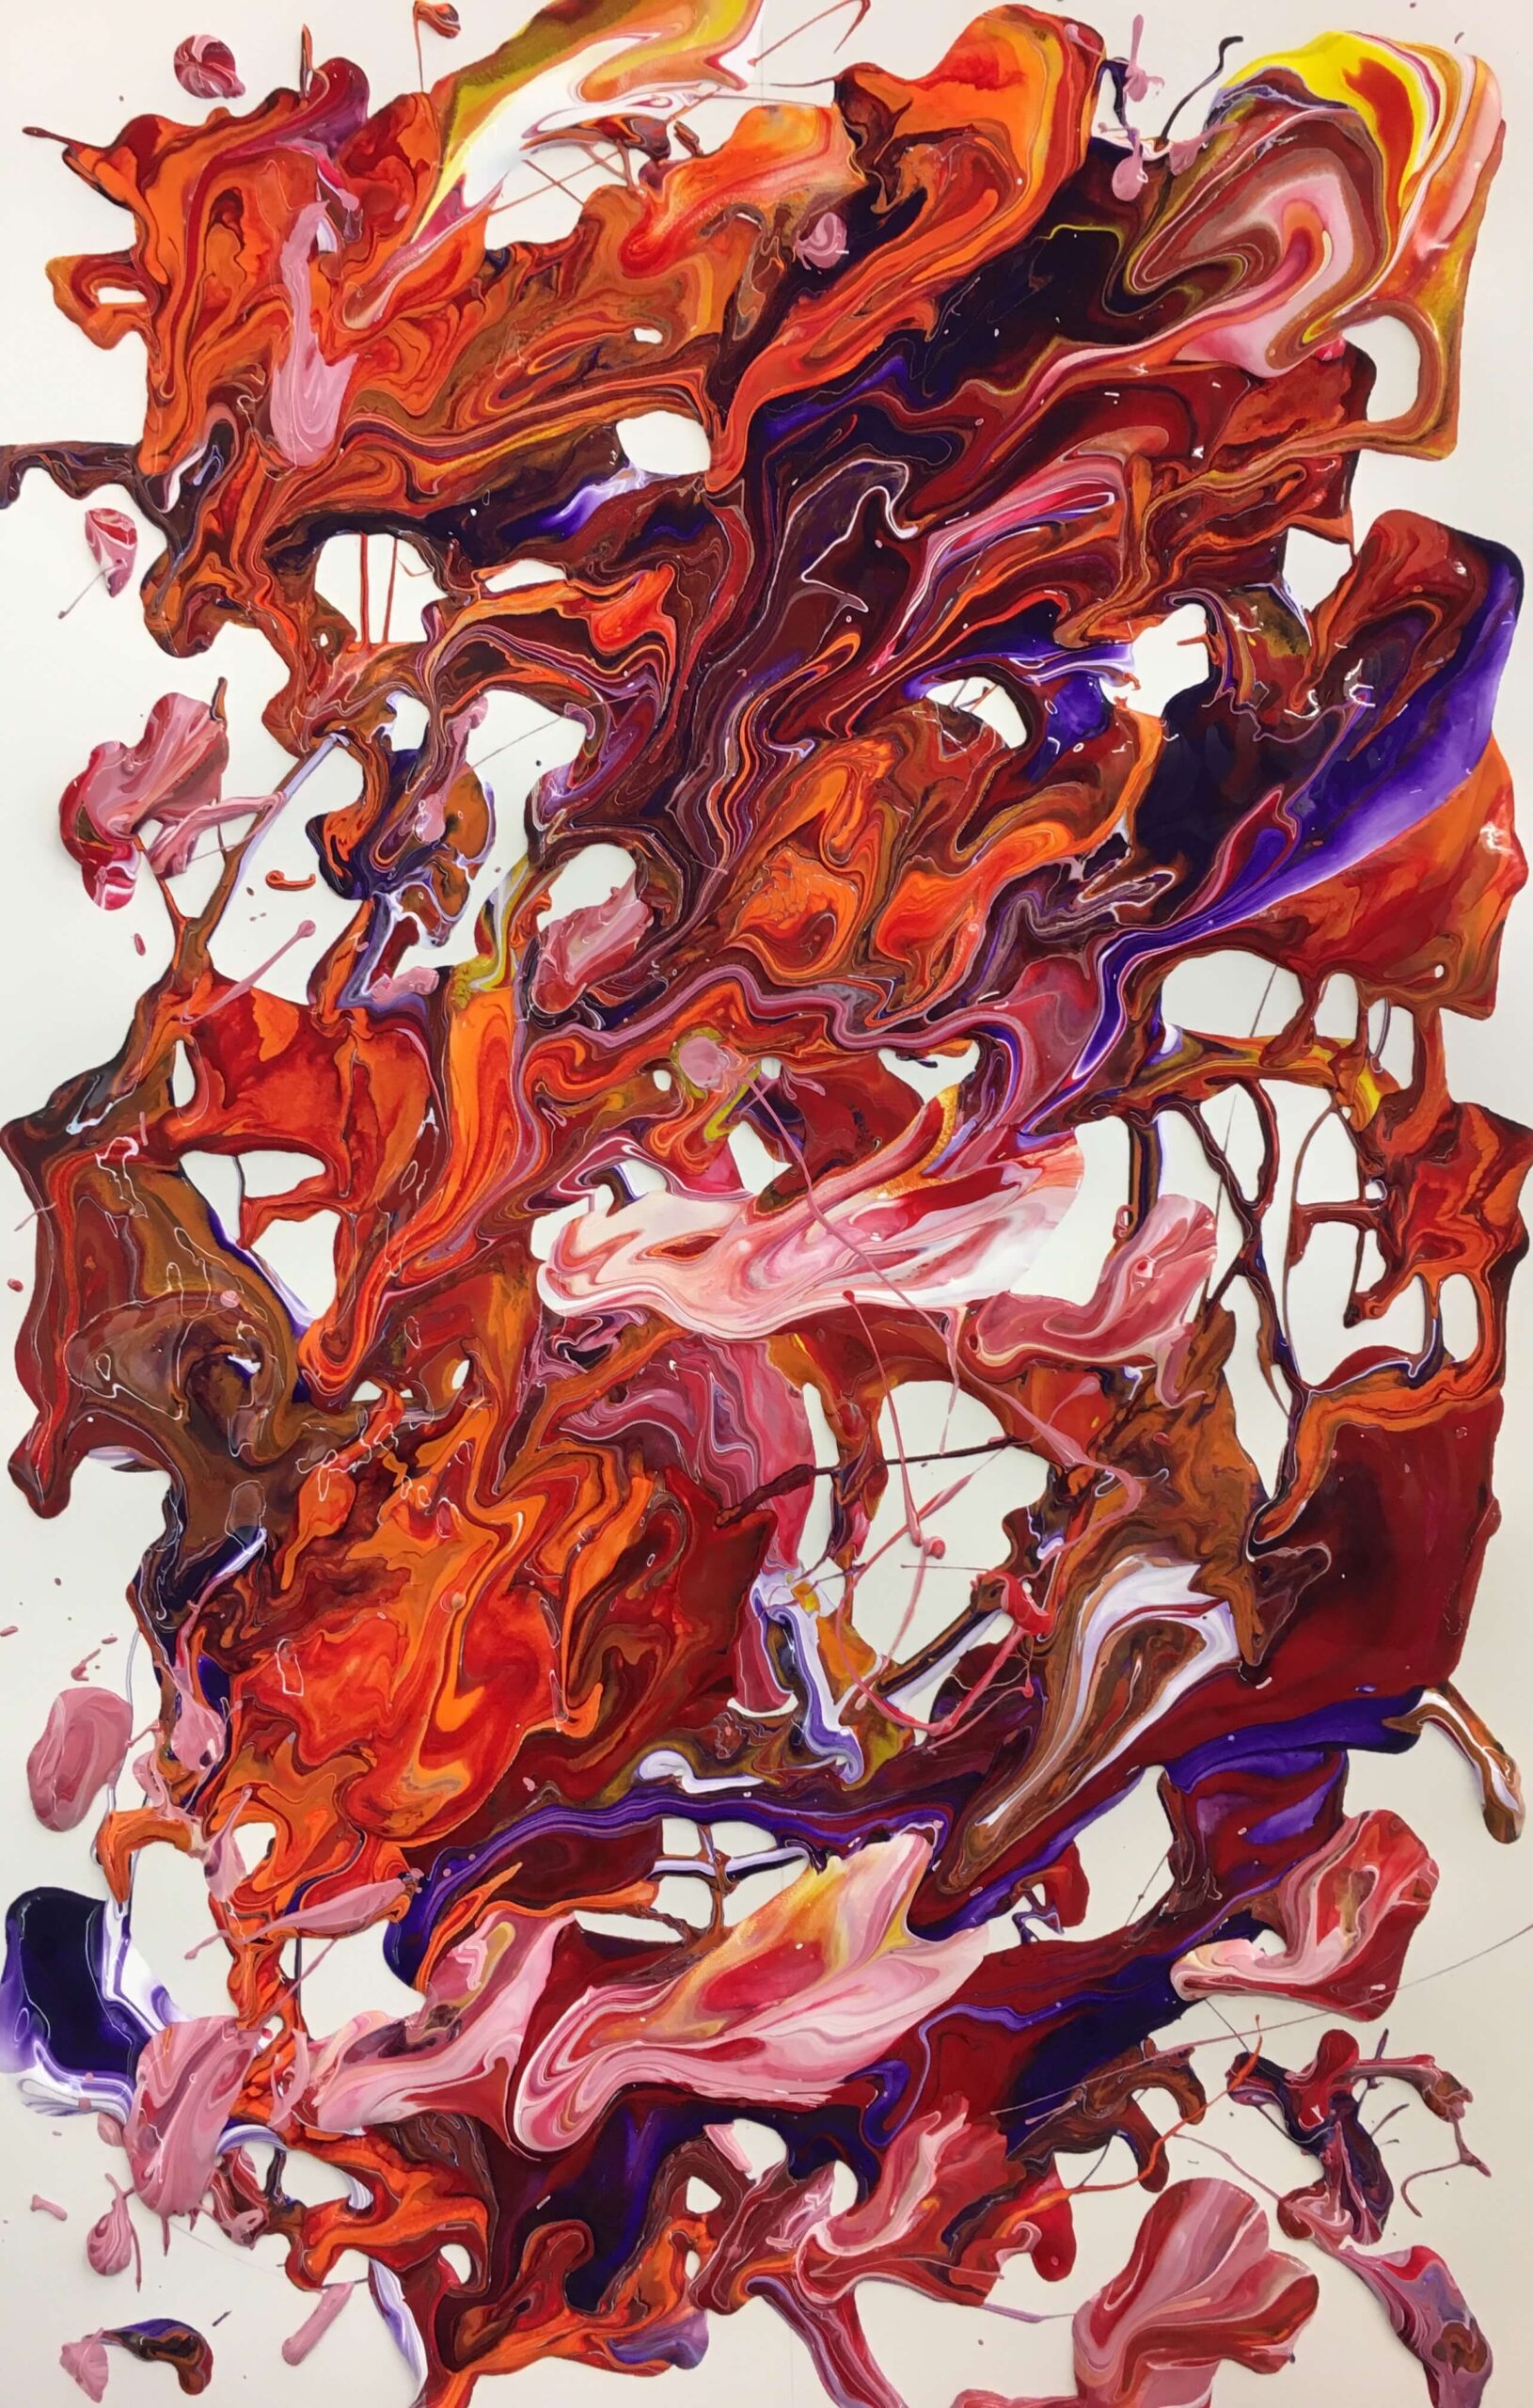 An abstract Illustration resembling paint blotches of red, pink, purple and orange hues.